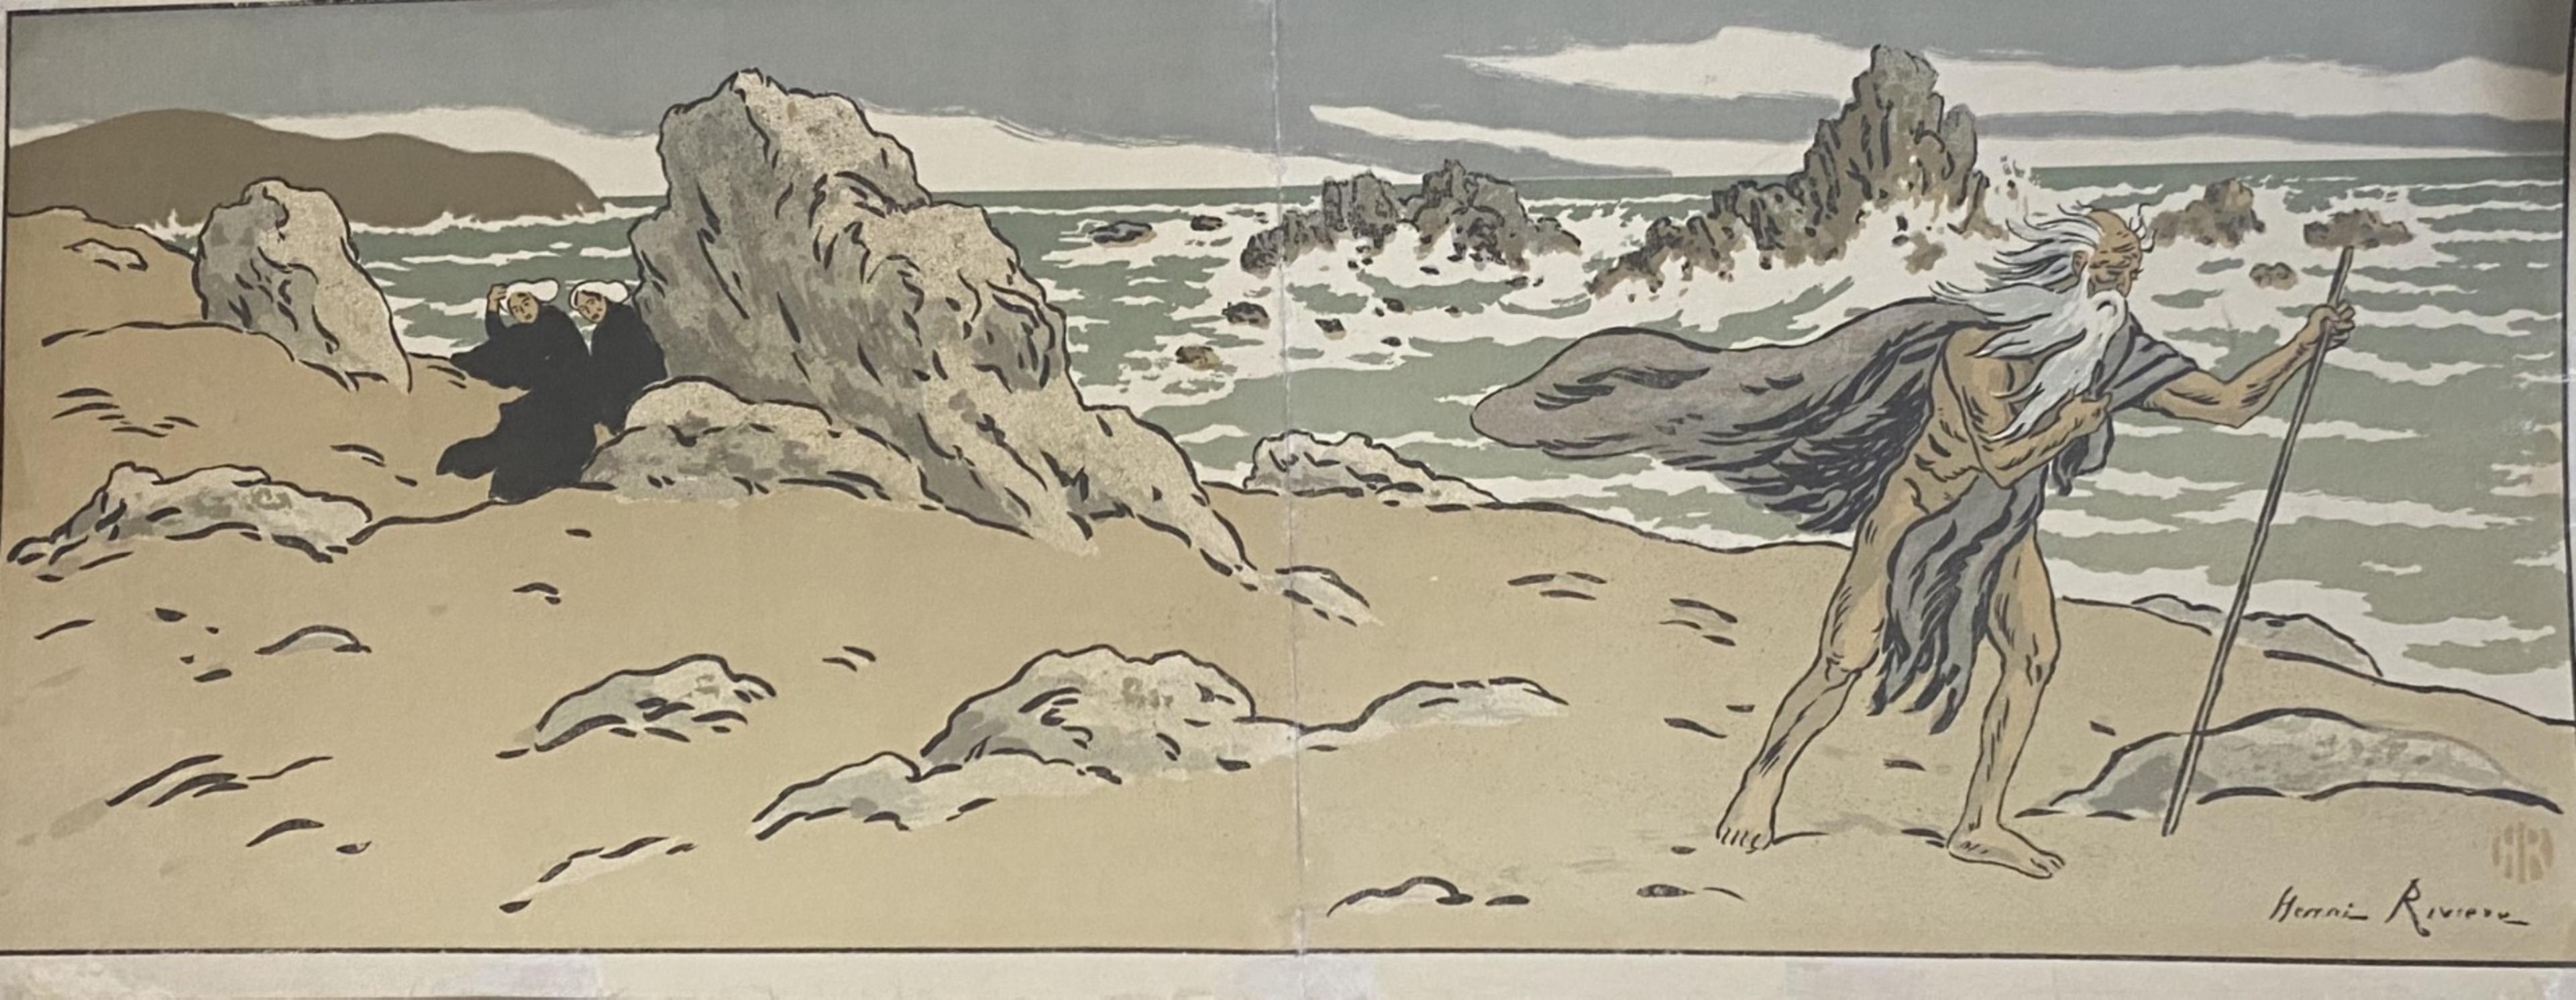 The Old Man and the Sea - Original Woodcut by Henri Riviere - Early 20th Century